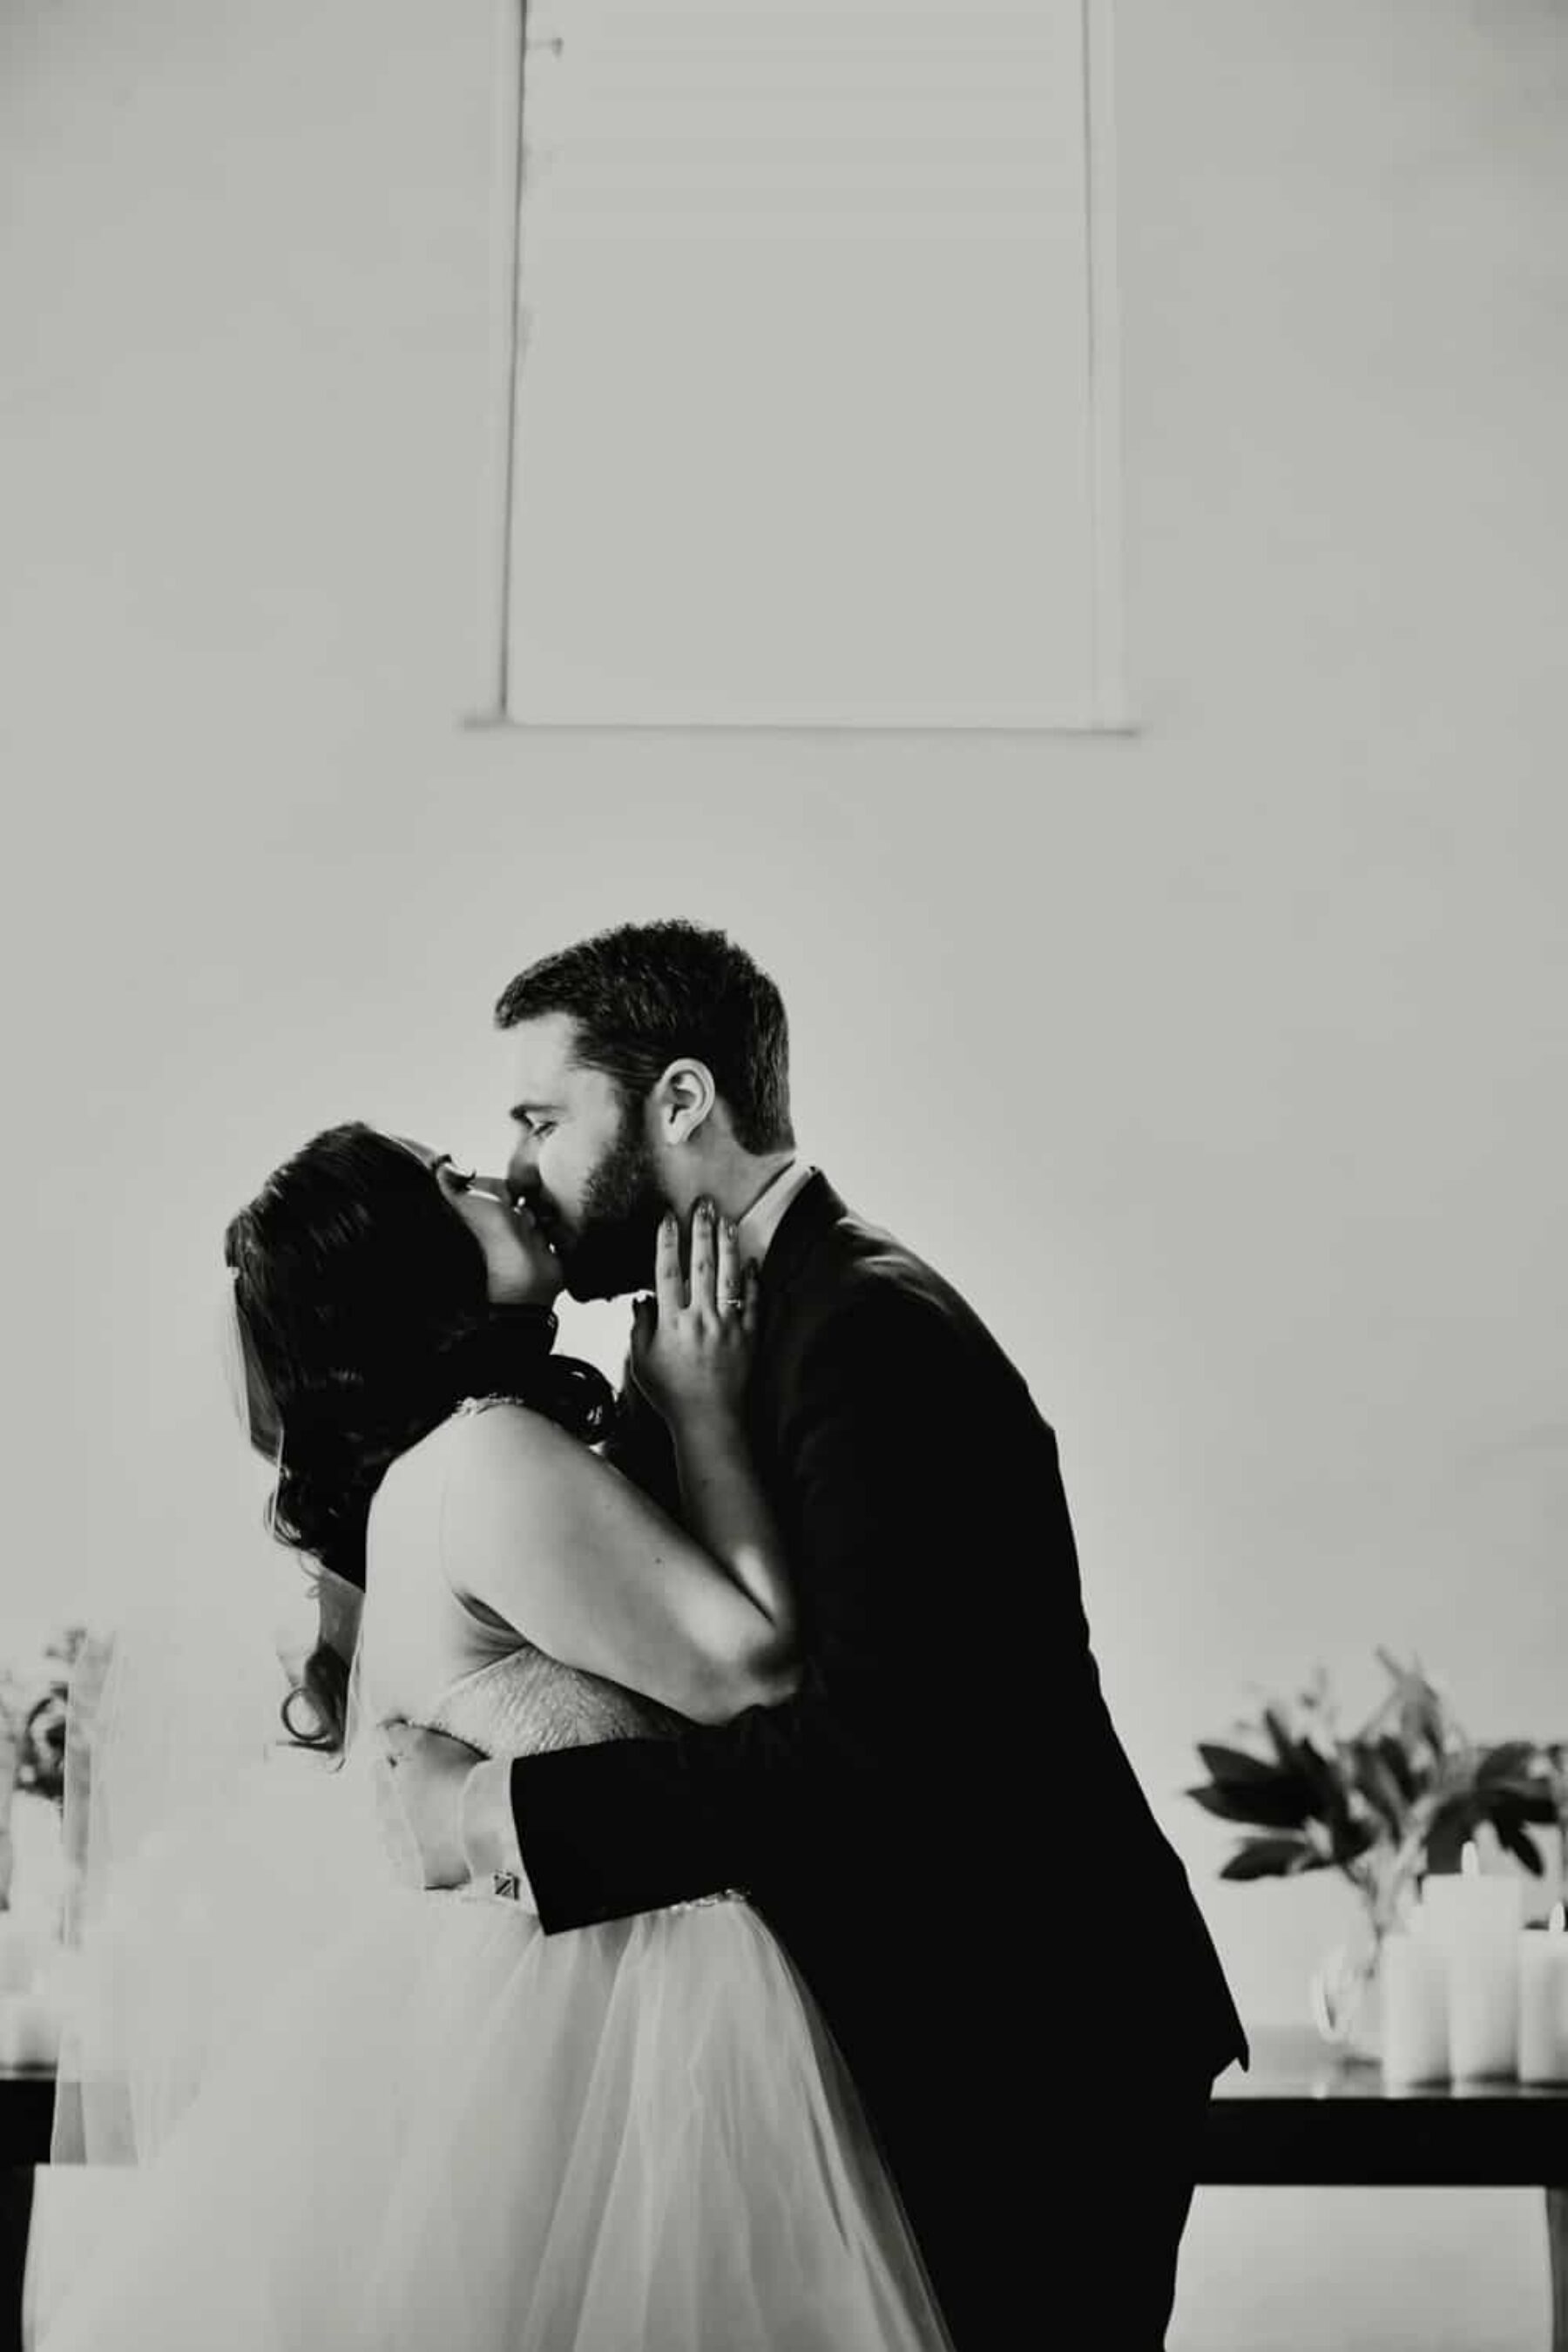 Stones of the Yarra Valley wedding / photography by Lilli Waters, I Got You Babe